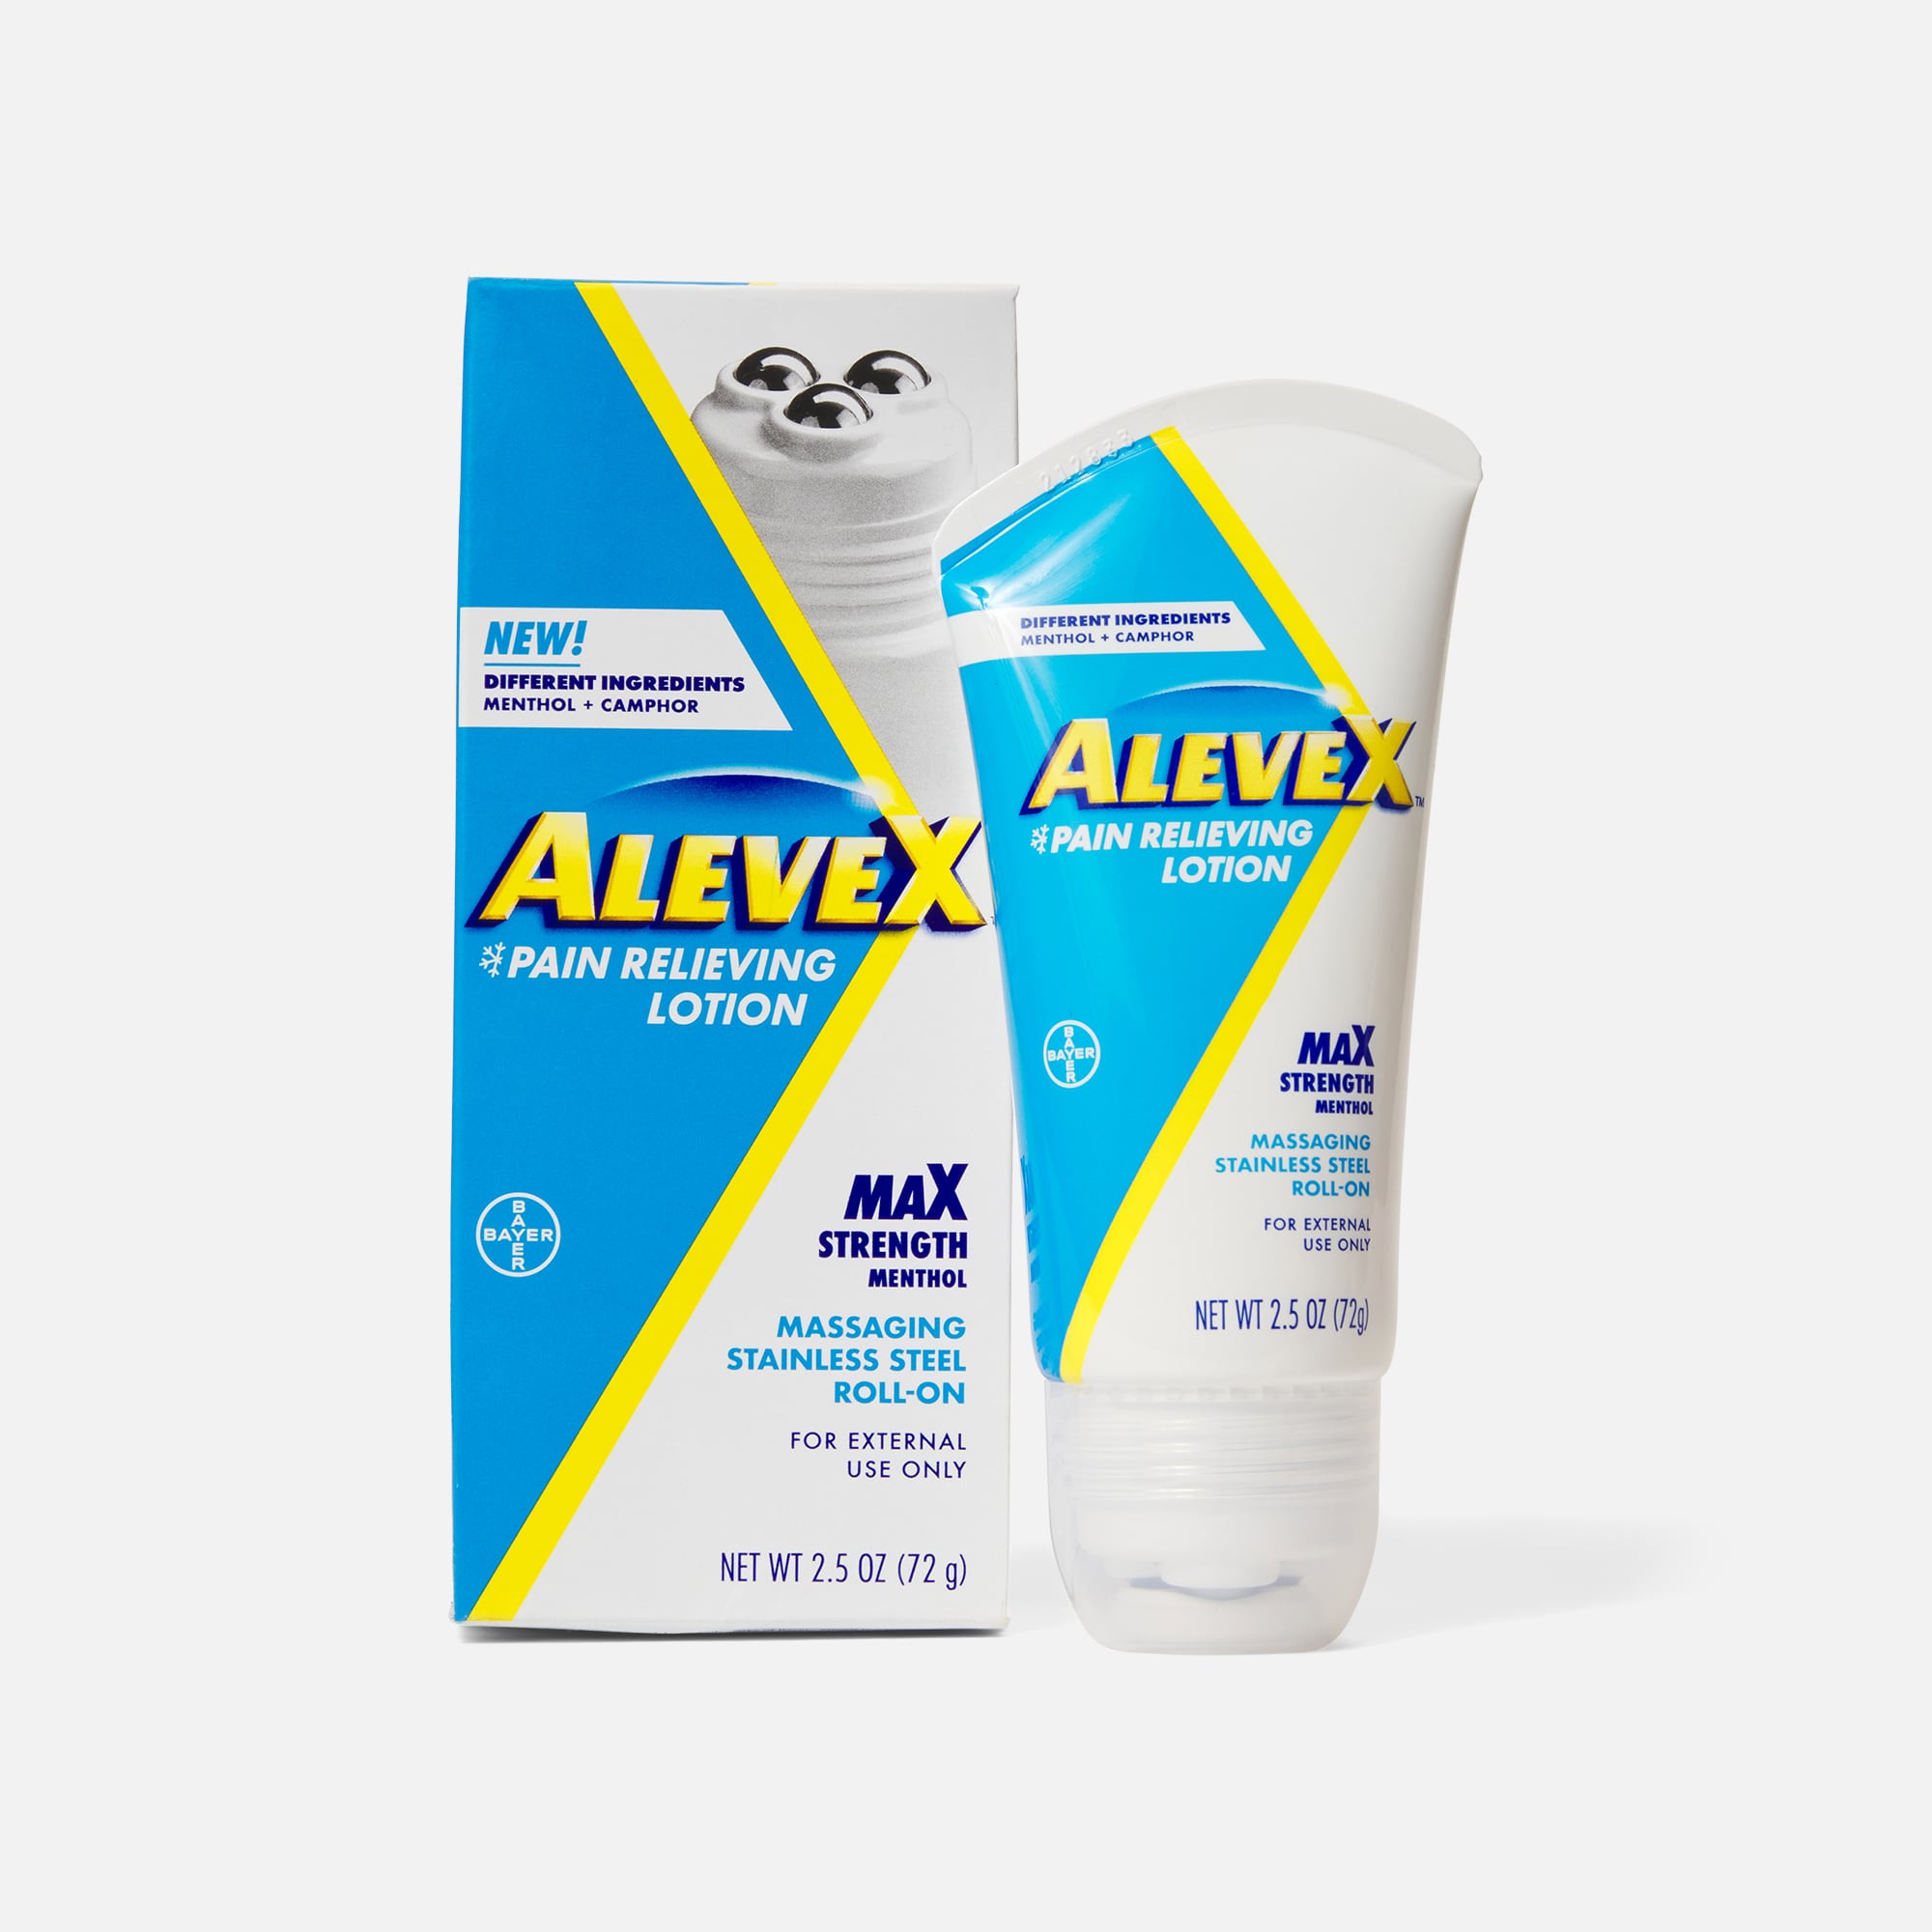 AleveX Pain Relieving Lotion with Rollerball, Powerful & Long-Lasting  Targeted Pain Relief With Deep Pressure Massage Applicator